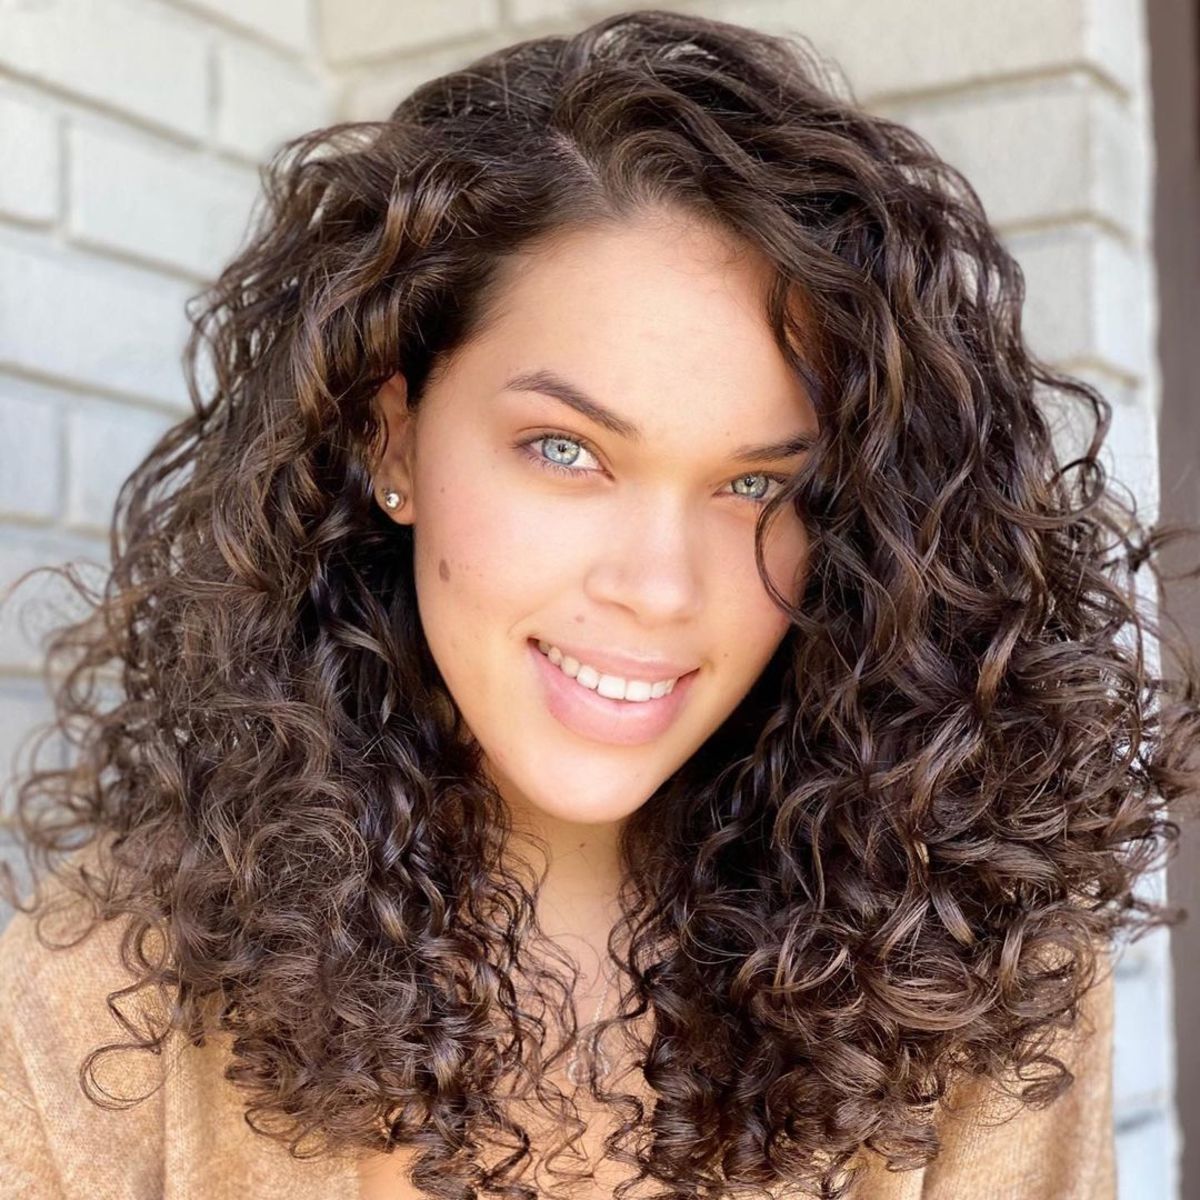 What are some cute hairstyles for people with medium length and naturally curly  hair? If you can please include a picture or tutorial, I really need some  help. - Quora